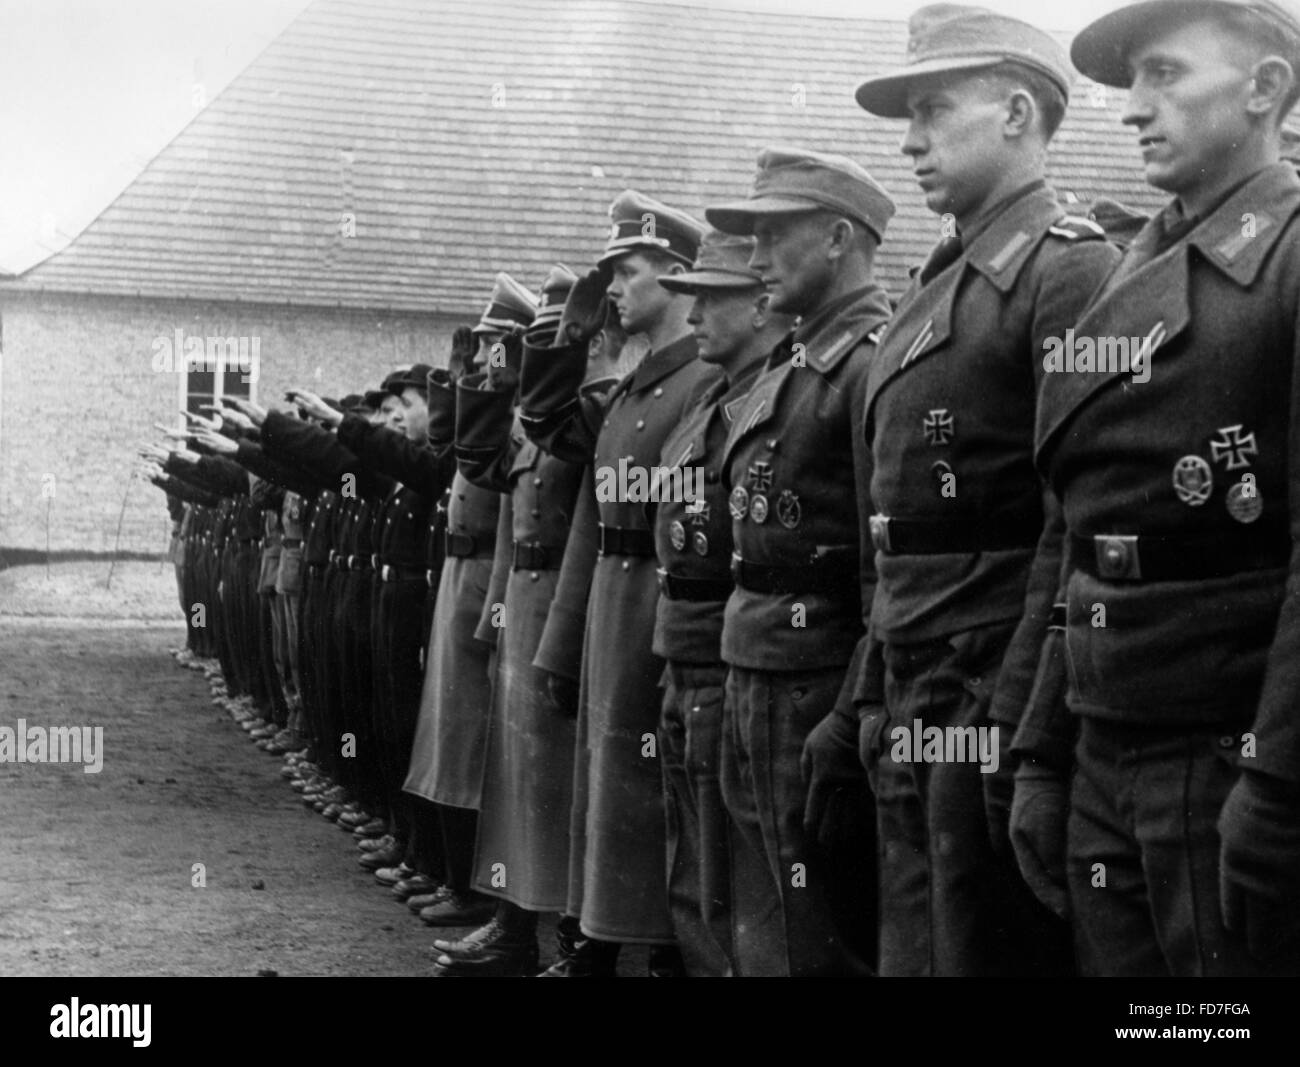 HJ members and armored infantry riflemen at roll call, 1944 Stock Photo